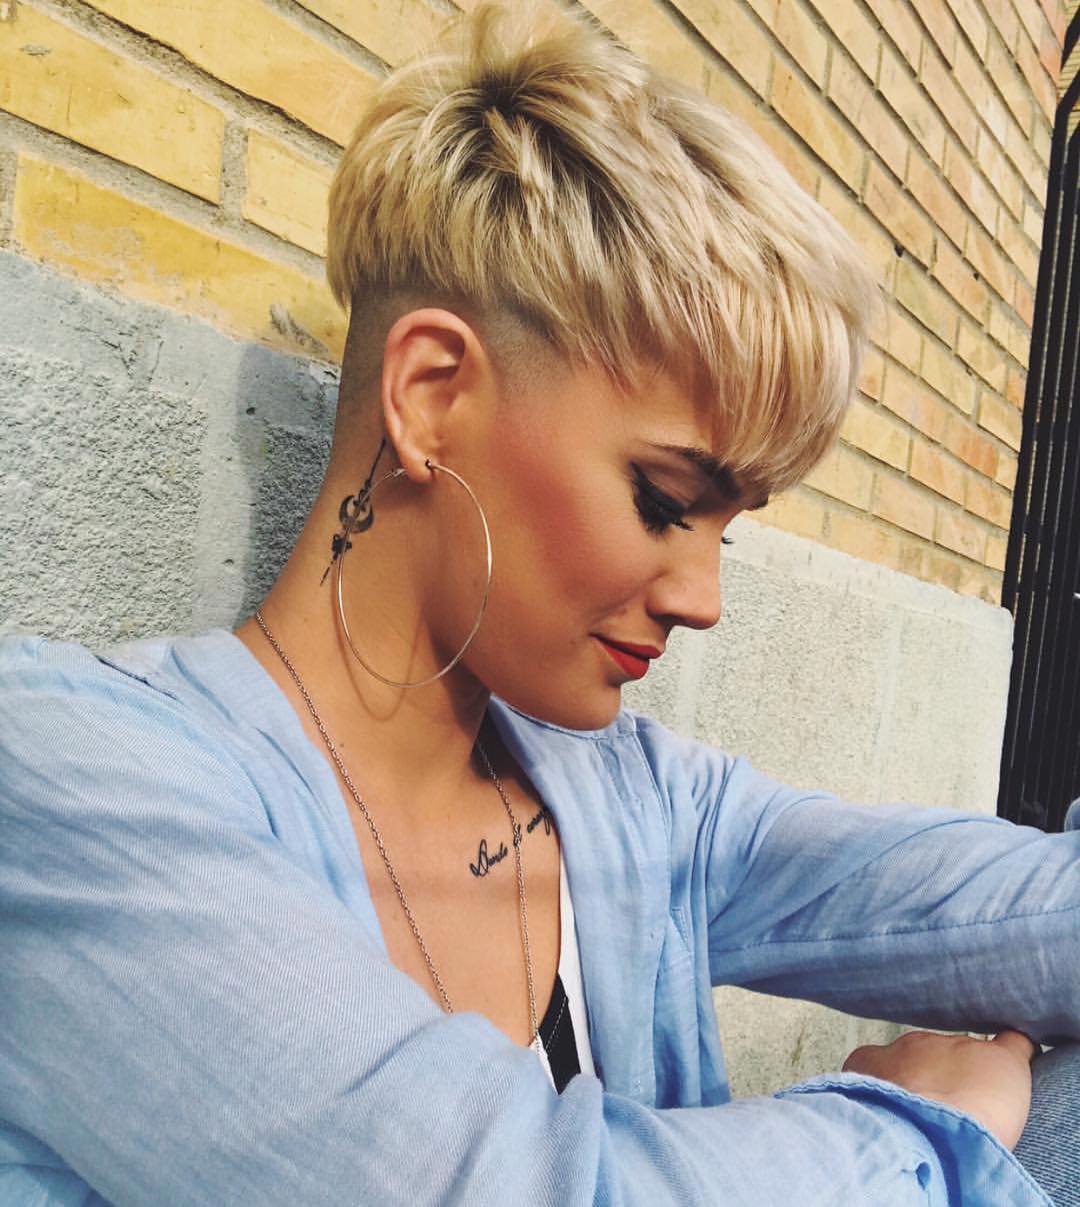 Stylish Pixie Haircuts Women Short Undercut Hairstyles 27864 Hot Sex Picture